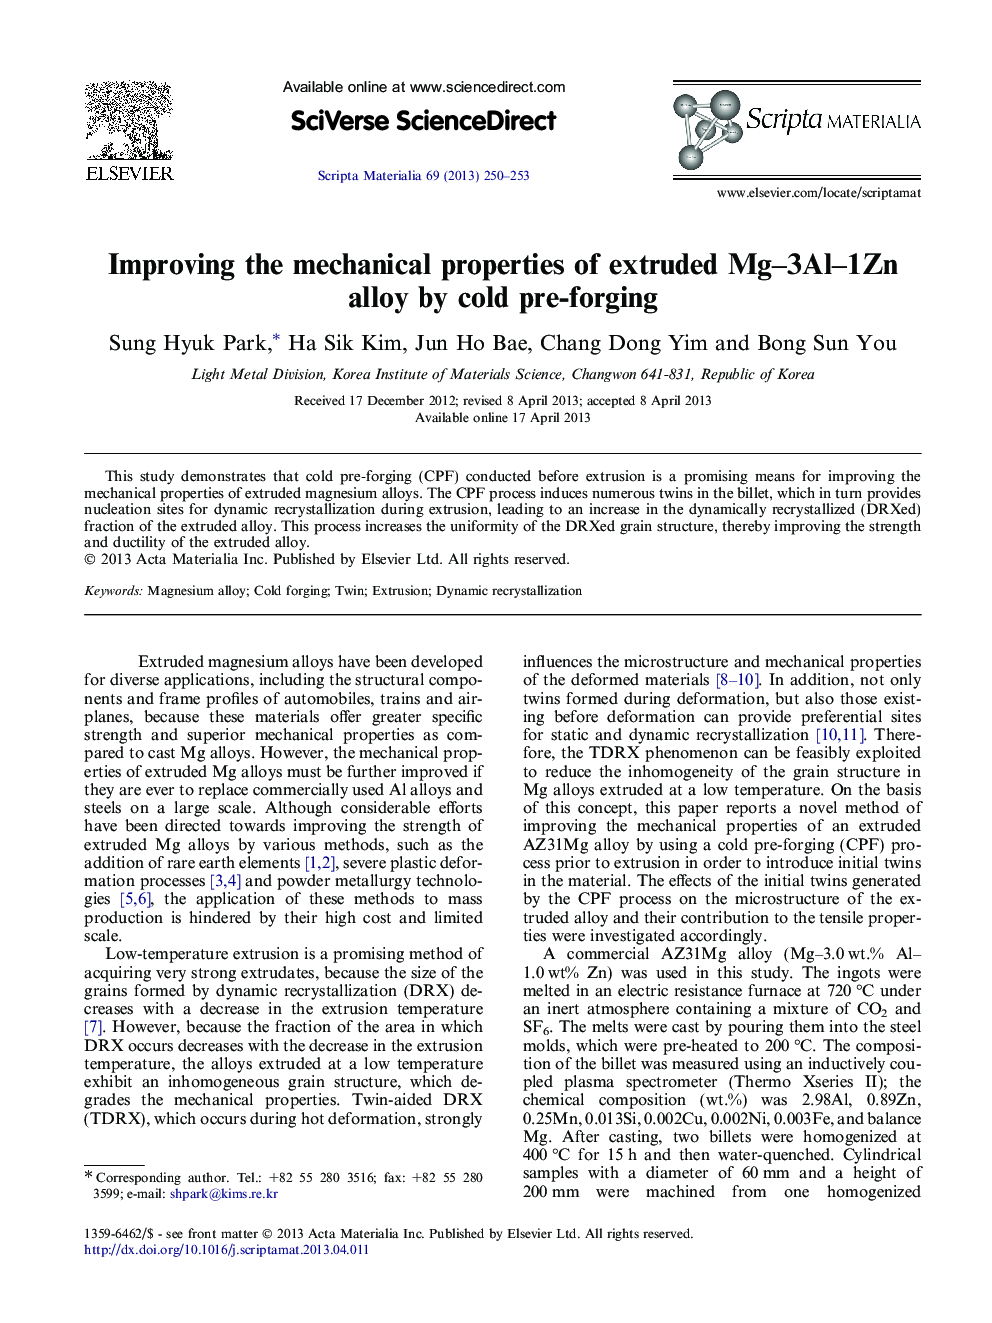 Improving the mechanical properties of extruded Mg–3Al–1Zn alloy by cold pre-forging